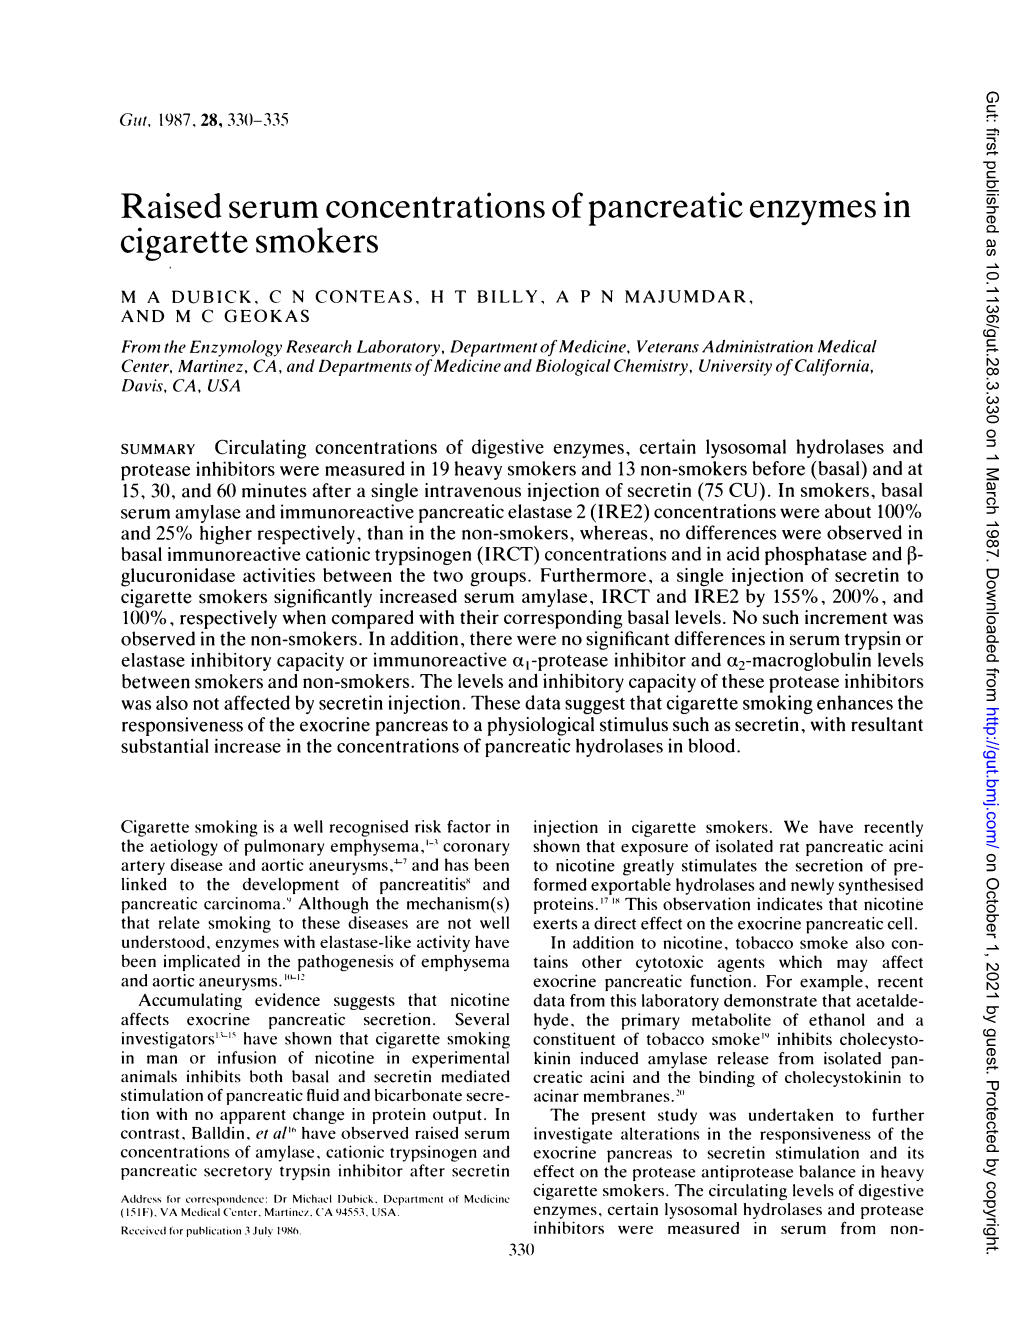 Raised Serum Concentrations of Pancreaticenzymes in Cigarette